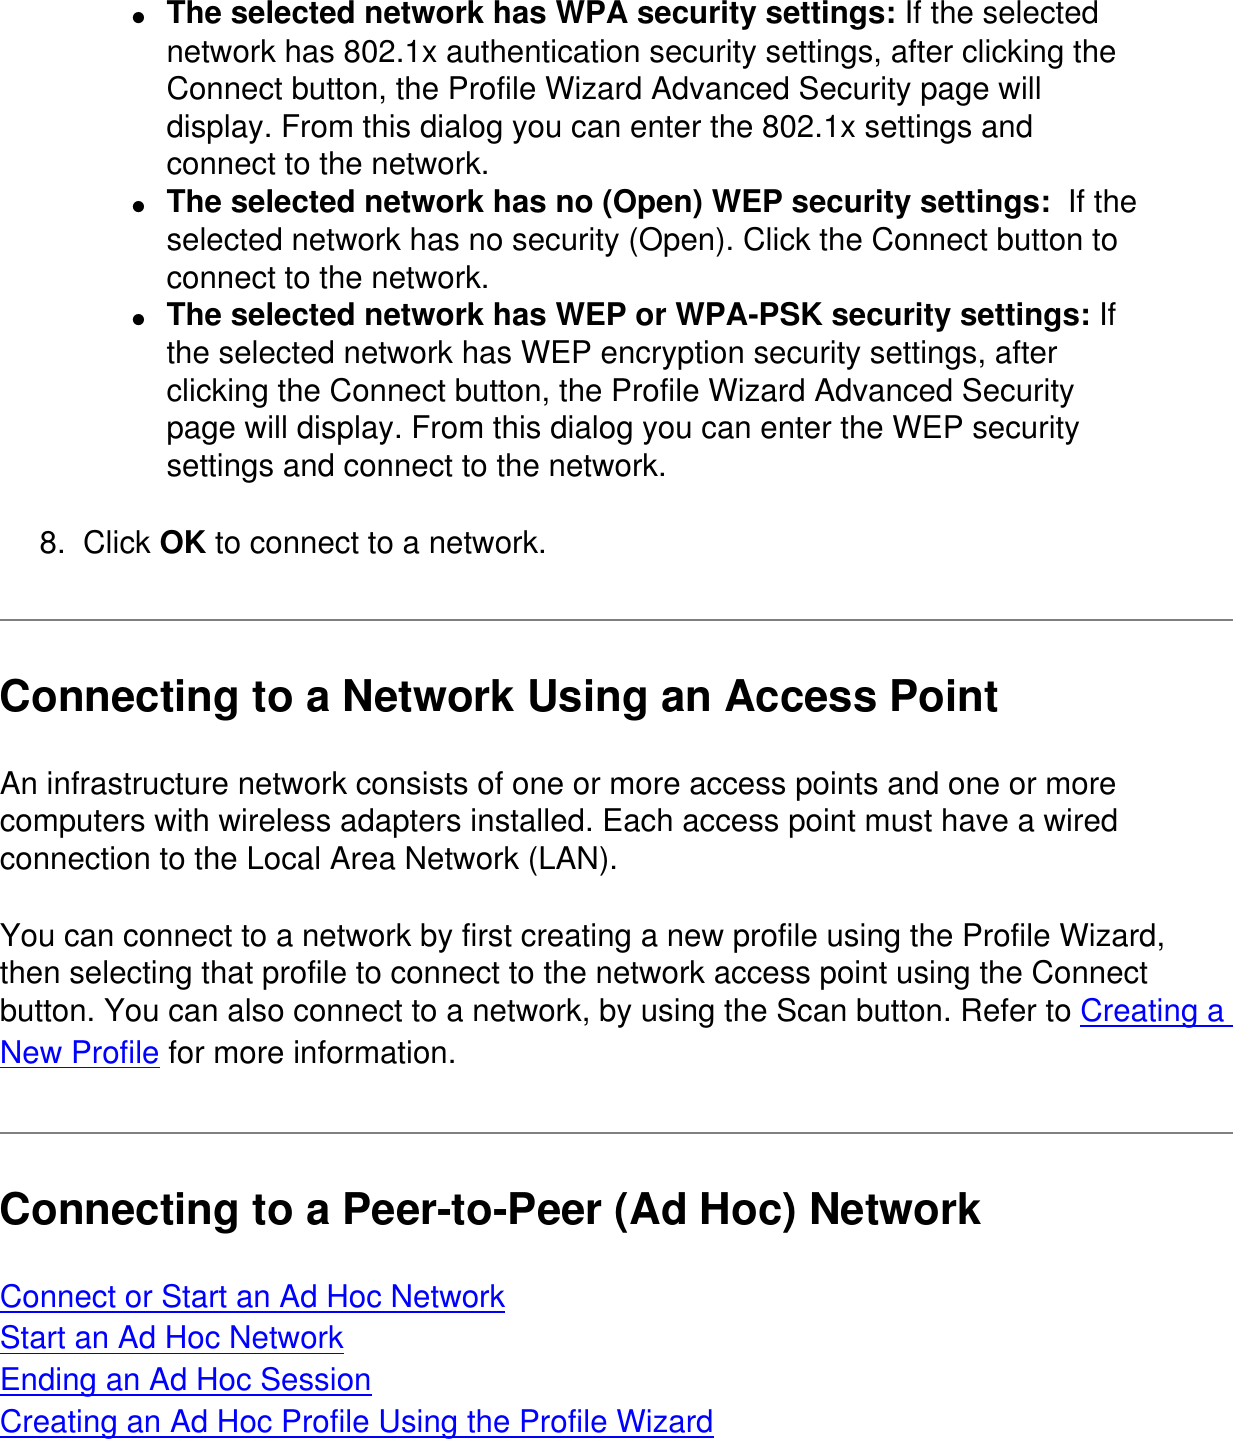 ●     The selected network has WPA security settings: If the selected network has 802.1x authentication security settings, after clicking the Connect button, the Profile Wizard Advanced Security page will display. From this dialog you can enter the 802.1x settings and connect to the network.●     The selected network has no (Open) WEP security settings:  If the selected network has no security (Open). Click the Connect button to connect to the network.●     The selected network has WEP or WPA-PSK security settings: If the selected network has WEP encryption security settings, after clicking the Connect button, the Profile Wizard Advanced Security page will display. From this dialog you can enter the WEP security settings and connect to the network.8.  Click OK to connect to a network.Connecting to a Network Using an Access PointAn infrastructure network consists of one or more access points and one or more computers with wireless adapters installed. Each access point must have a wired connection to the Local Area Network (LAN).You can connect to a network by first creating a new profile using the Profile Wizard, then selecting that profile to connect to the network access point using the Connect button. You can also connect to a network, by using the Scan button. Refer to Creating a New Profile for more information.Connecting to a Peer-to-Peer (Ad Hoc) NetworkConnect or Start an Ad Hoc NetworkStart an Ad Hoc NetworkEnding an Ad Hoc SessionCreating an Ad Hoc Profile Using the Profile Wizard